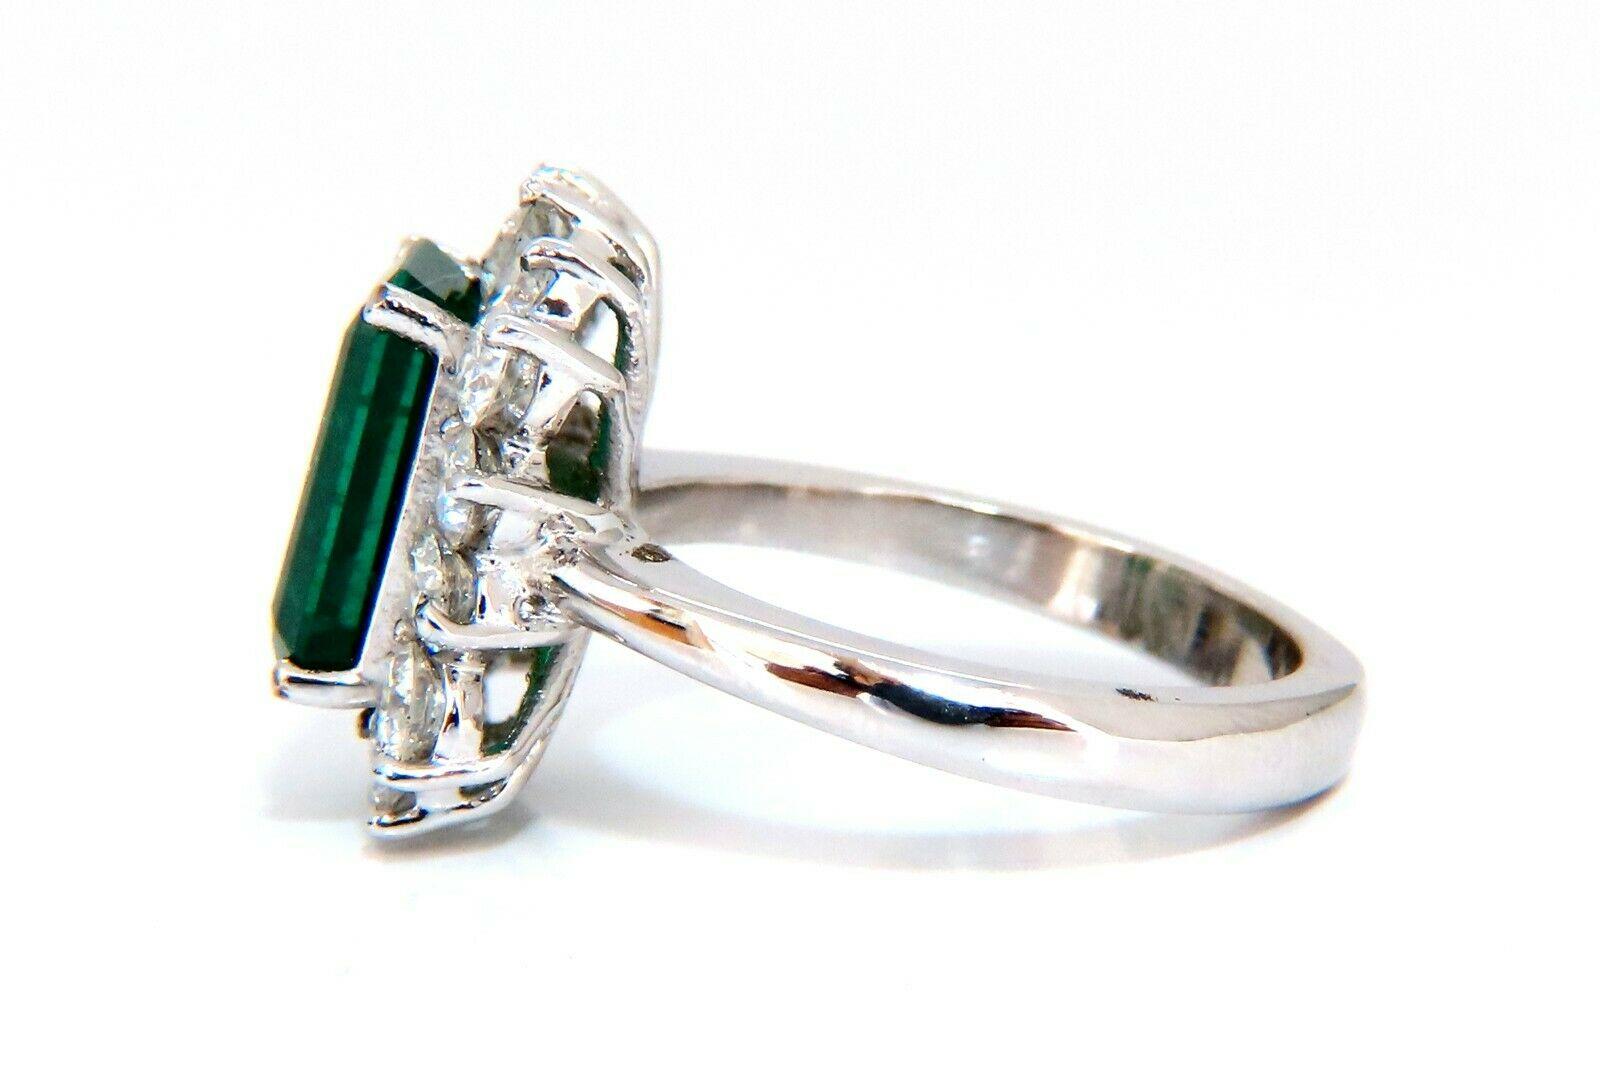 Prime Halo Mod Deco Green.

3.40ct. Natural Emerald Ring

Emerald, Brilliant cut

11.5 x 8.1mm Diameter

Transparent & Vivid Green 

1.67ct. Diamonds.

Round & full cuts 

G-color Vs-2 clarity.  

14kt. white gold

7 grams

Ring Current size: